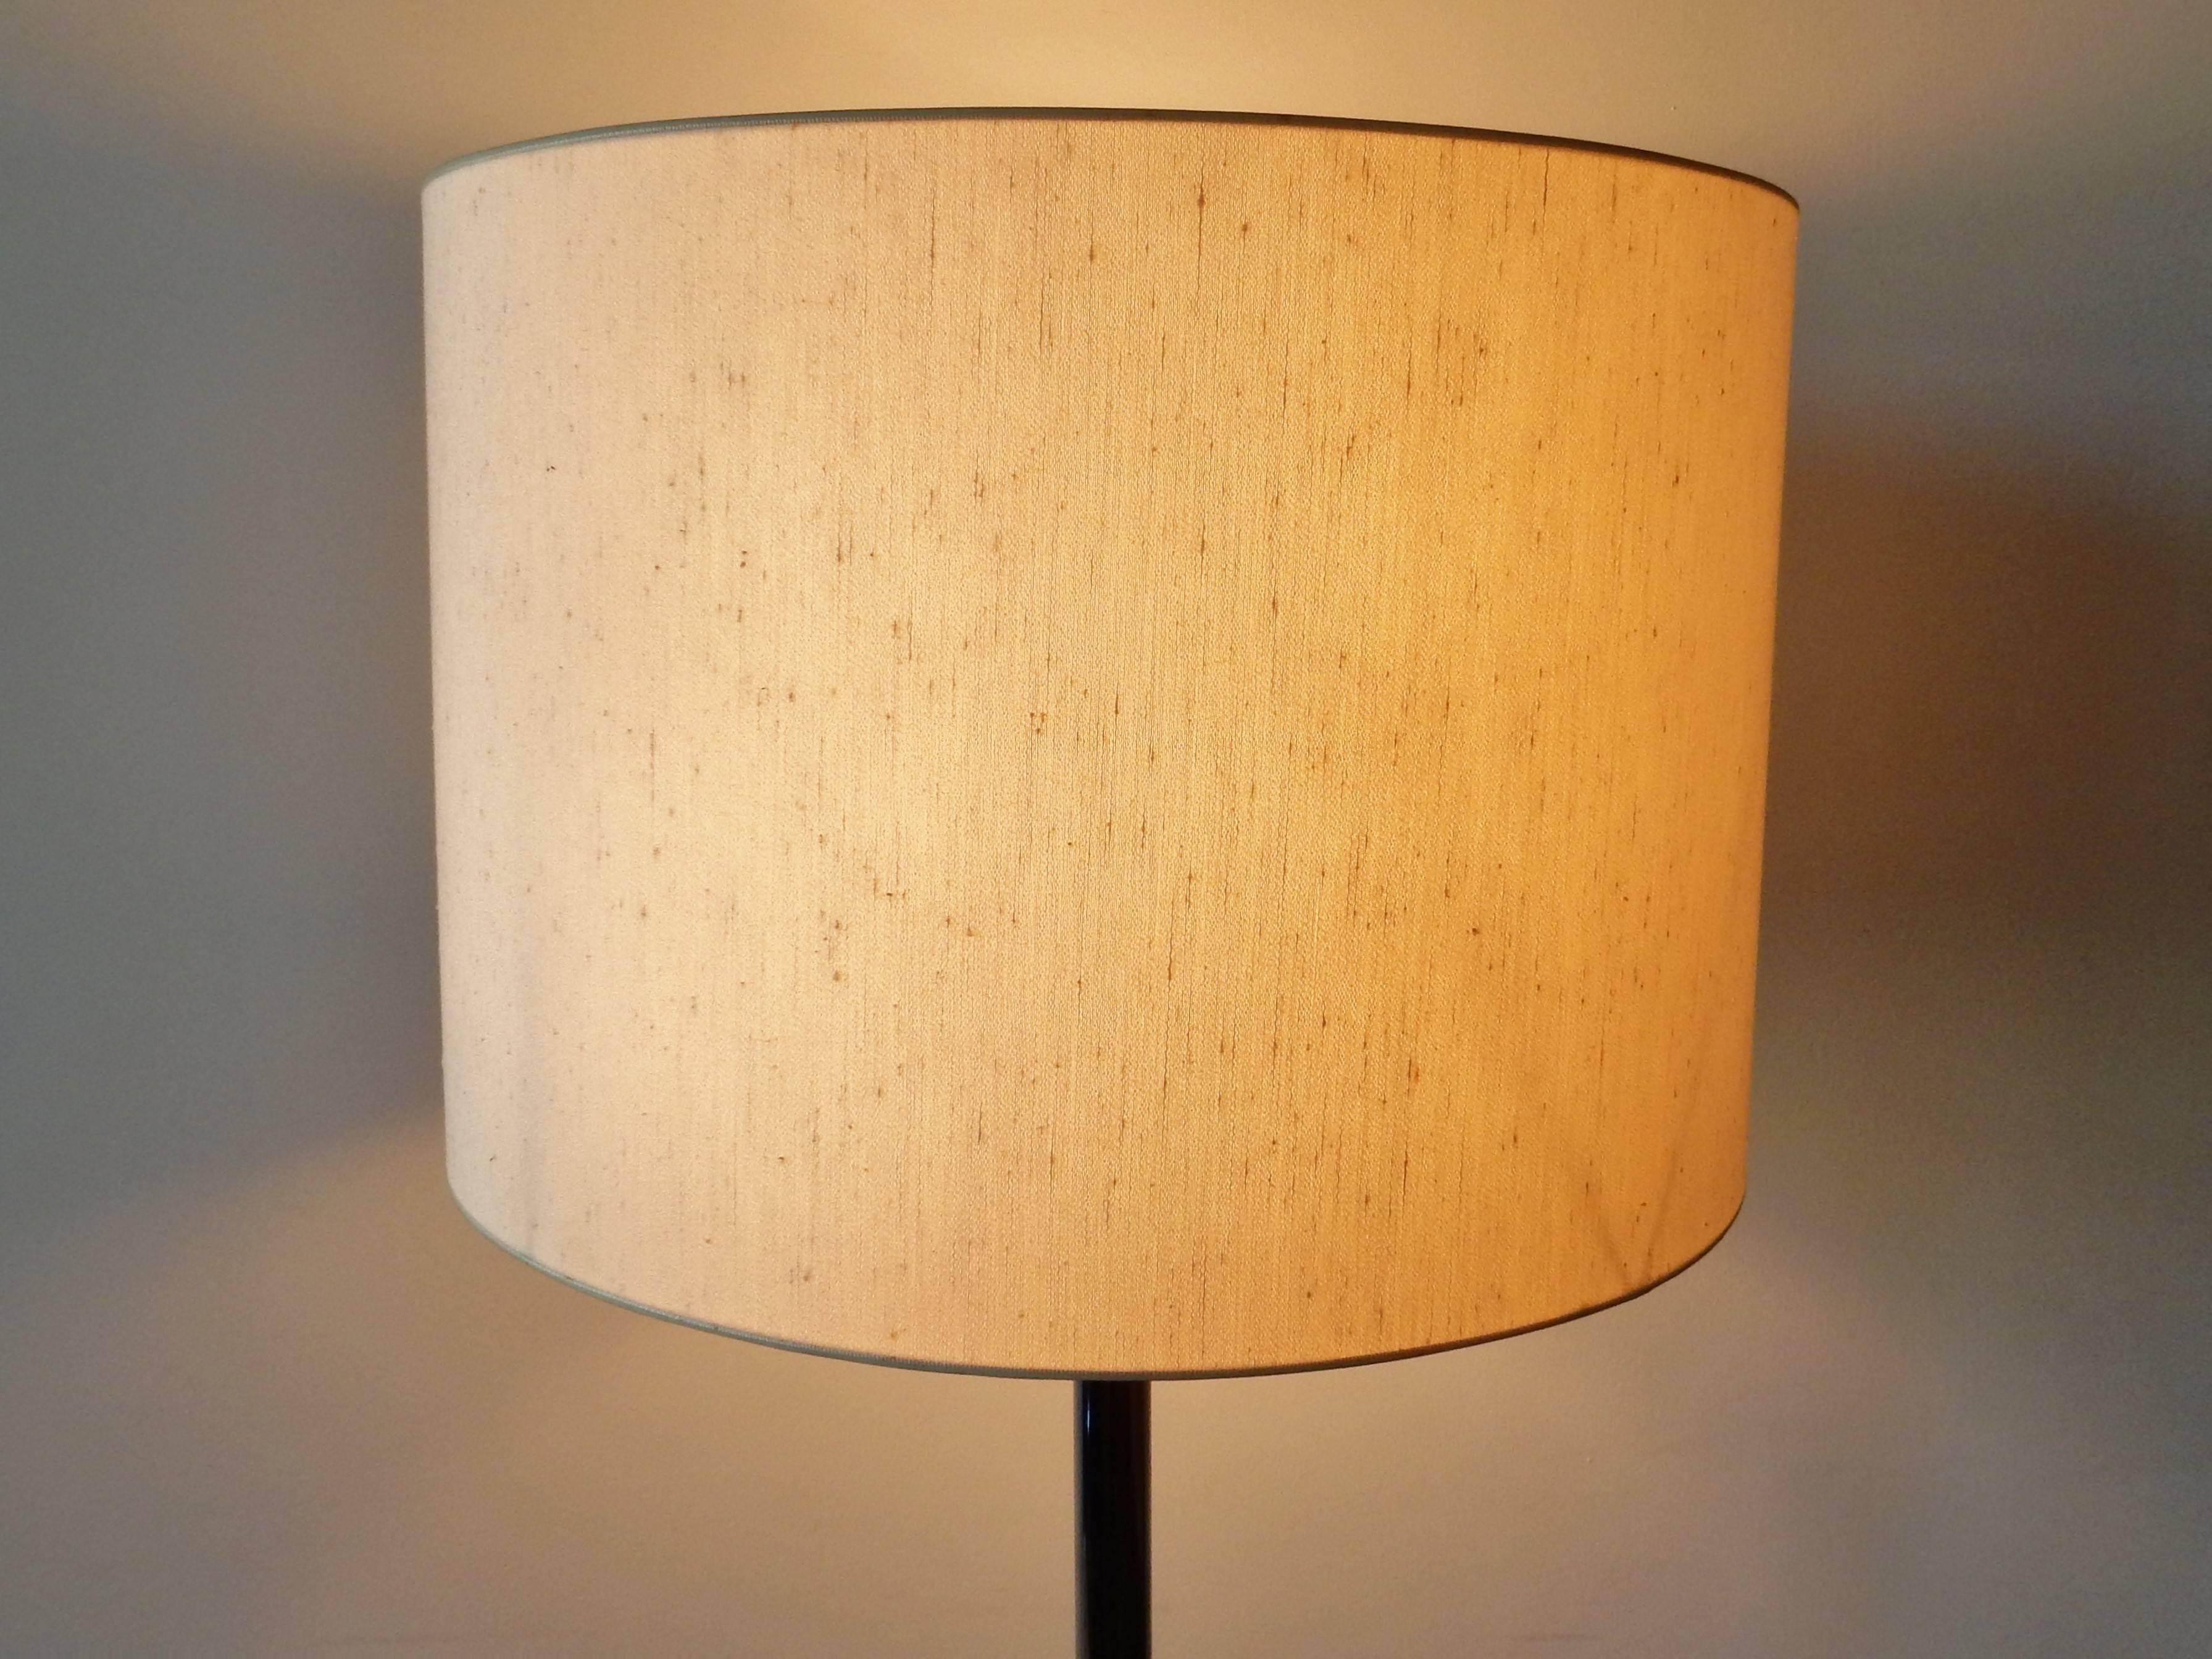 Big Floor Lamp Model 'Shantung' with Fabric Shade by RAAK, Netherlands, 1970s In Good Condition For Sale In Steenwijk, NL